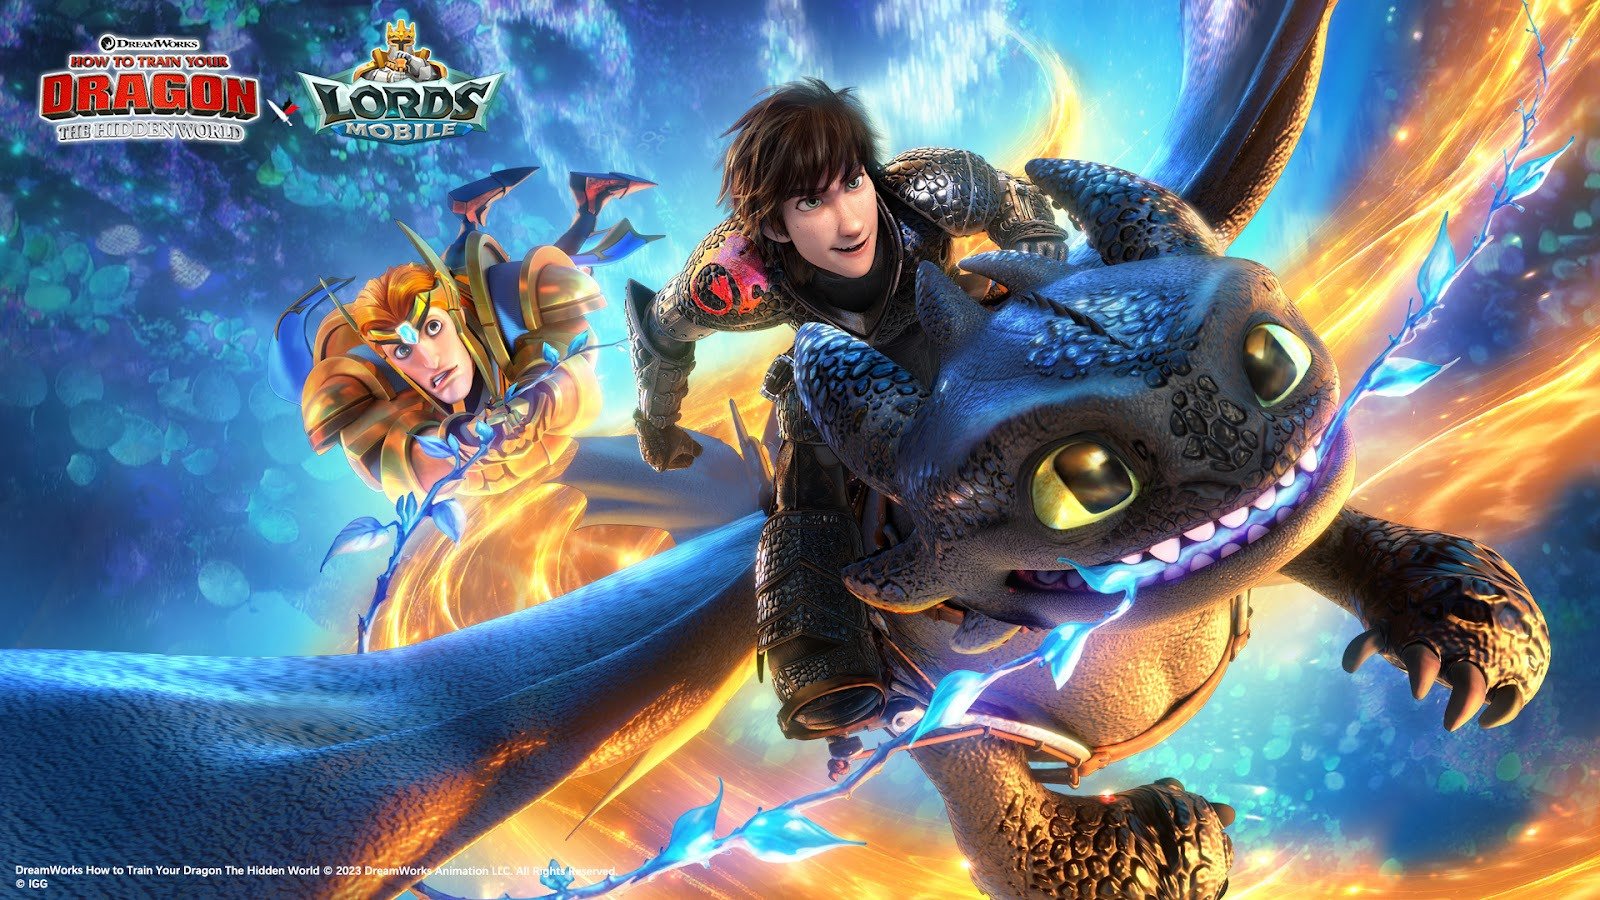 Lords Mobile Gets Airborne with a Massive Dreamworks How to Train Your Dragon Collab Event